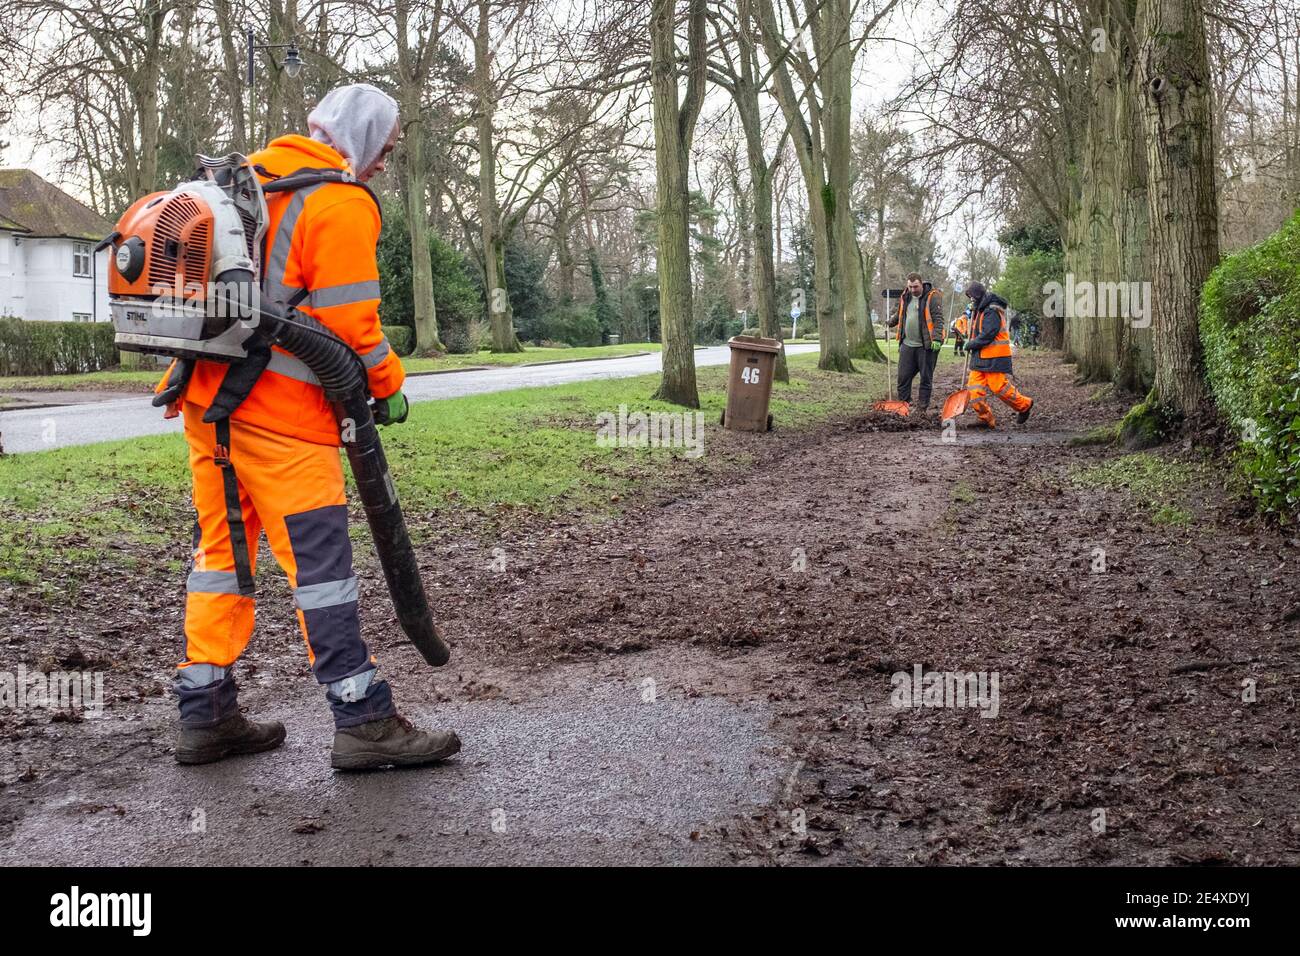 Council workers clearing path of leaves in affluent residential area. Using leaf blowers and wearing high visibility clothing Stock Photo